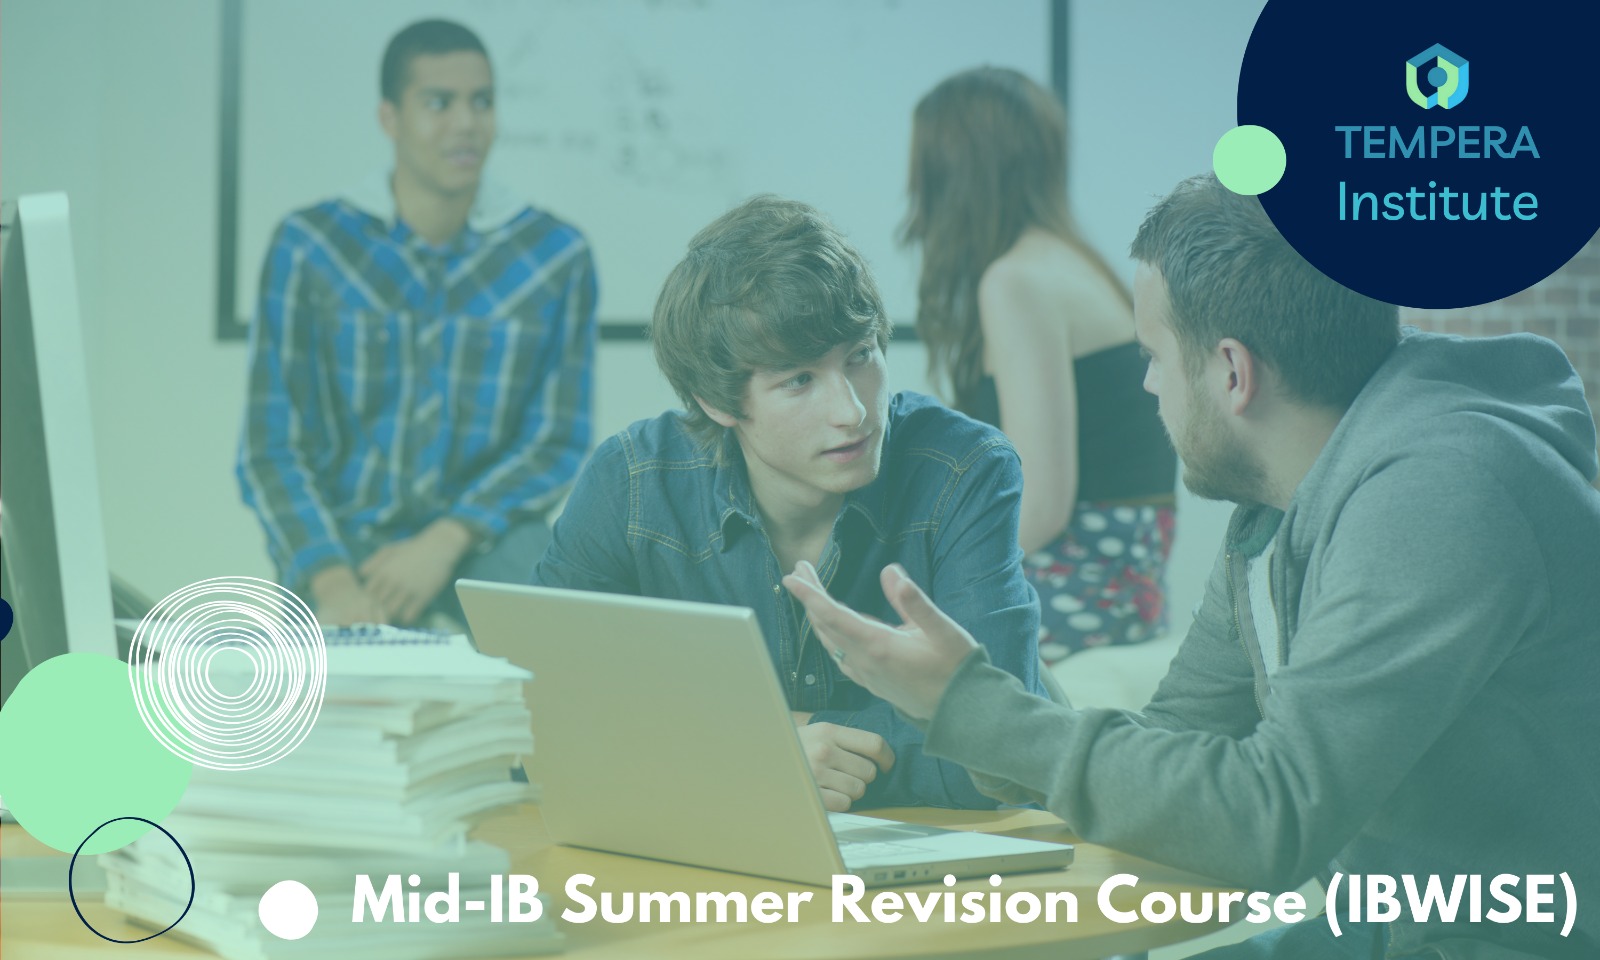 Mid-IB Summer Revision Course (IBWISE)